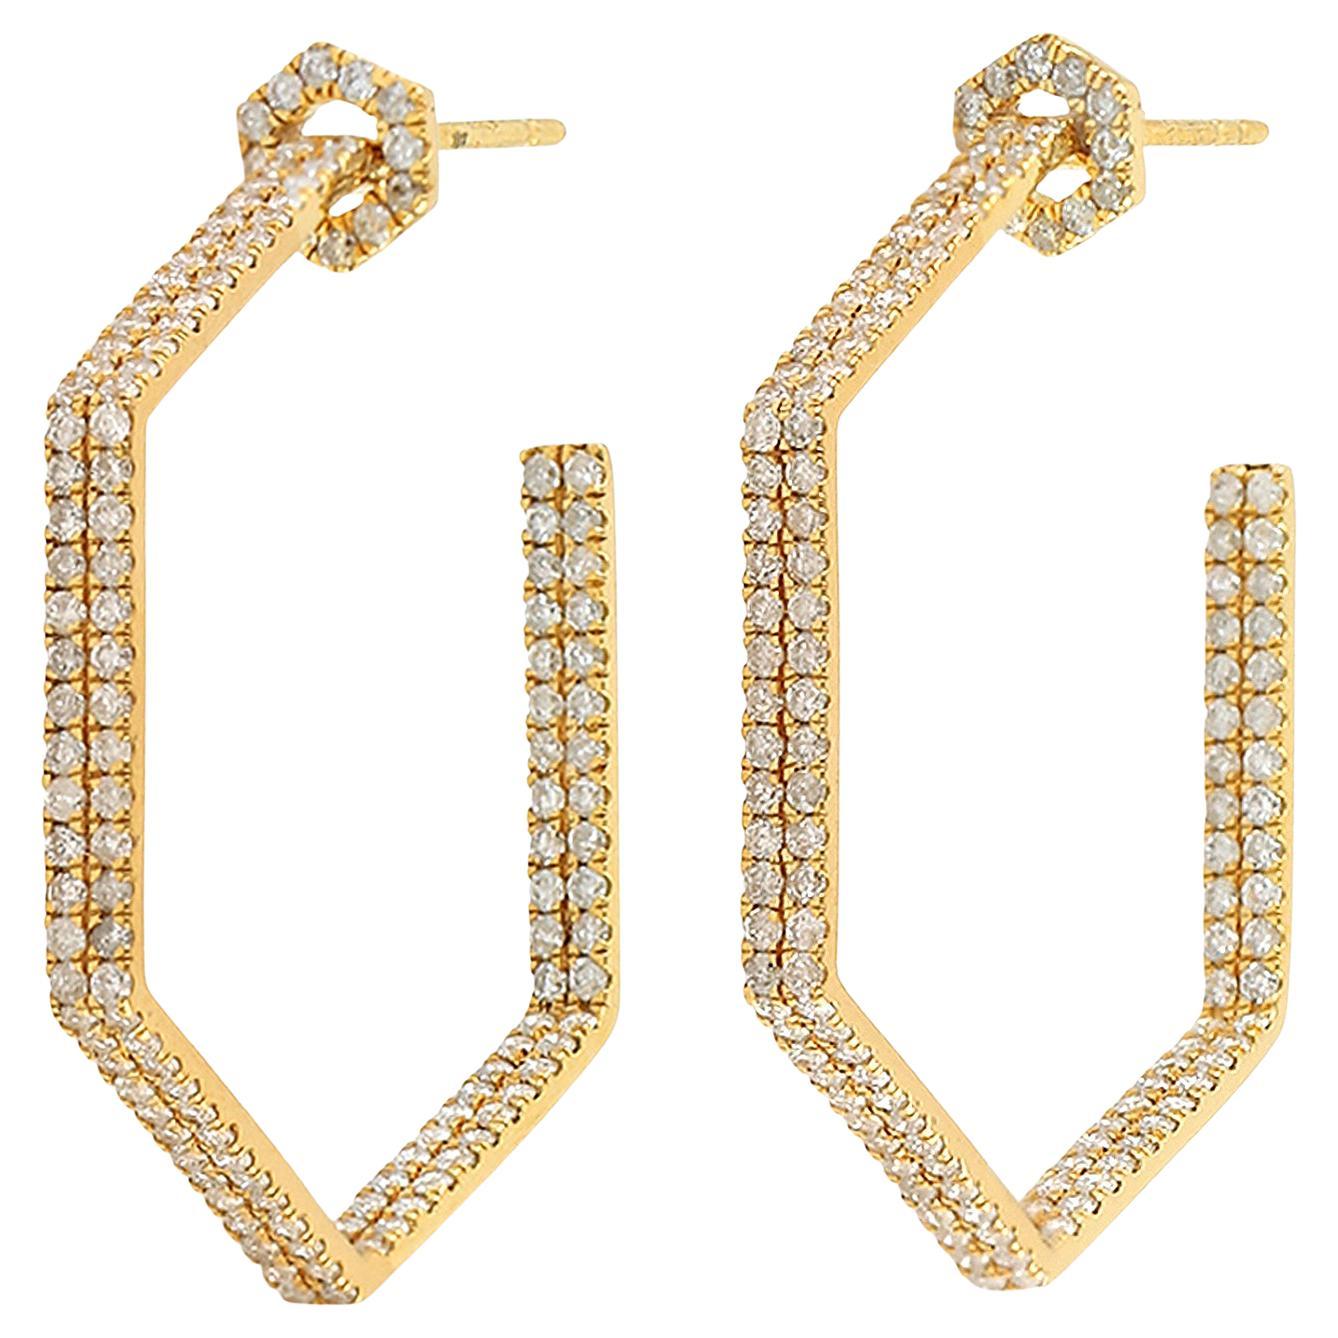 Geometric Shaped Dangle Earrings With Diamonds made in 18k yellow gold For Sale